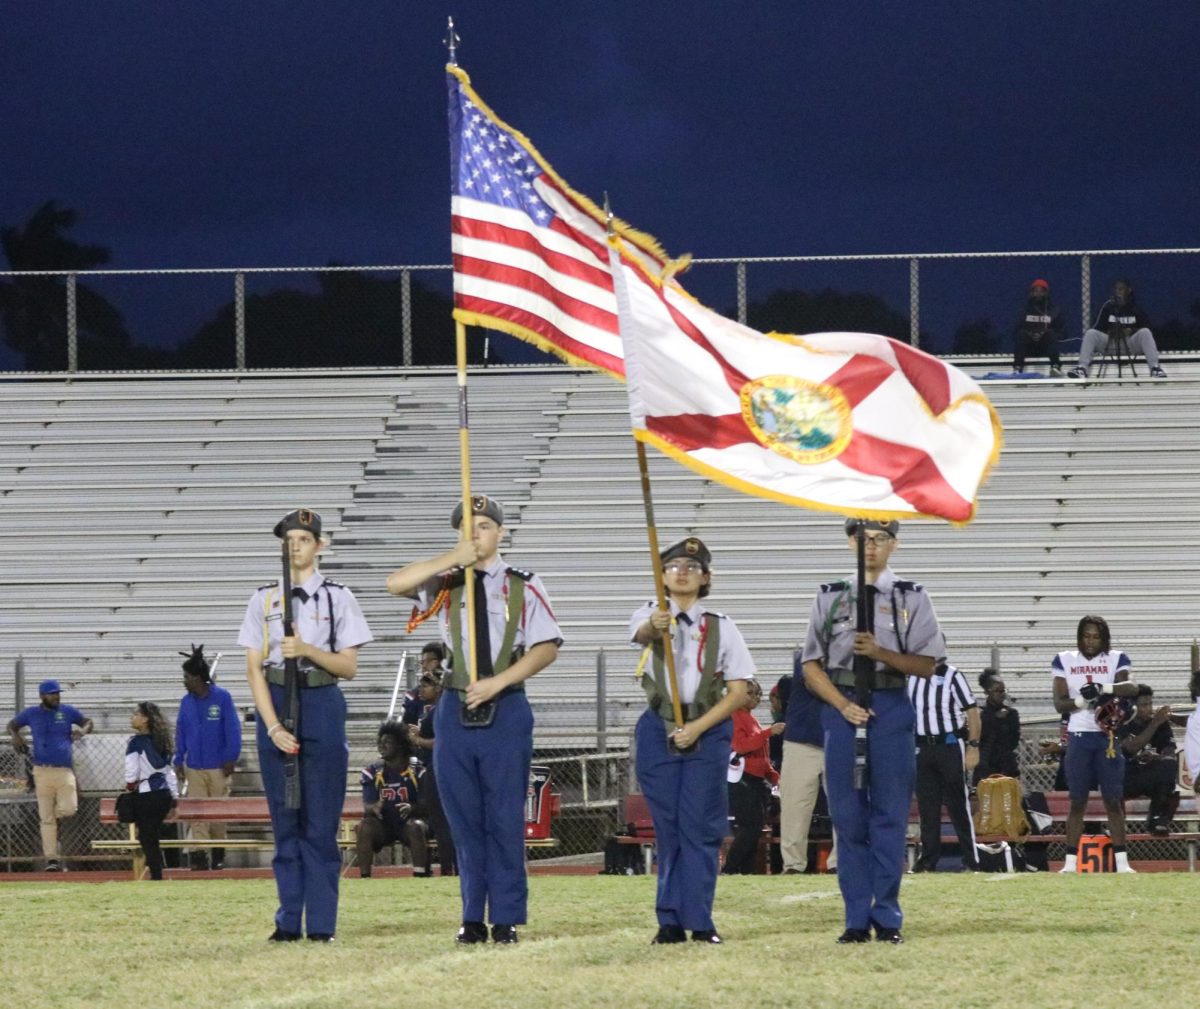 South Broward High Schools JROTC starts off the game with their flag ceremony and the national anthem.